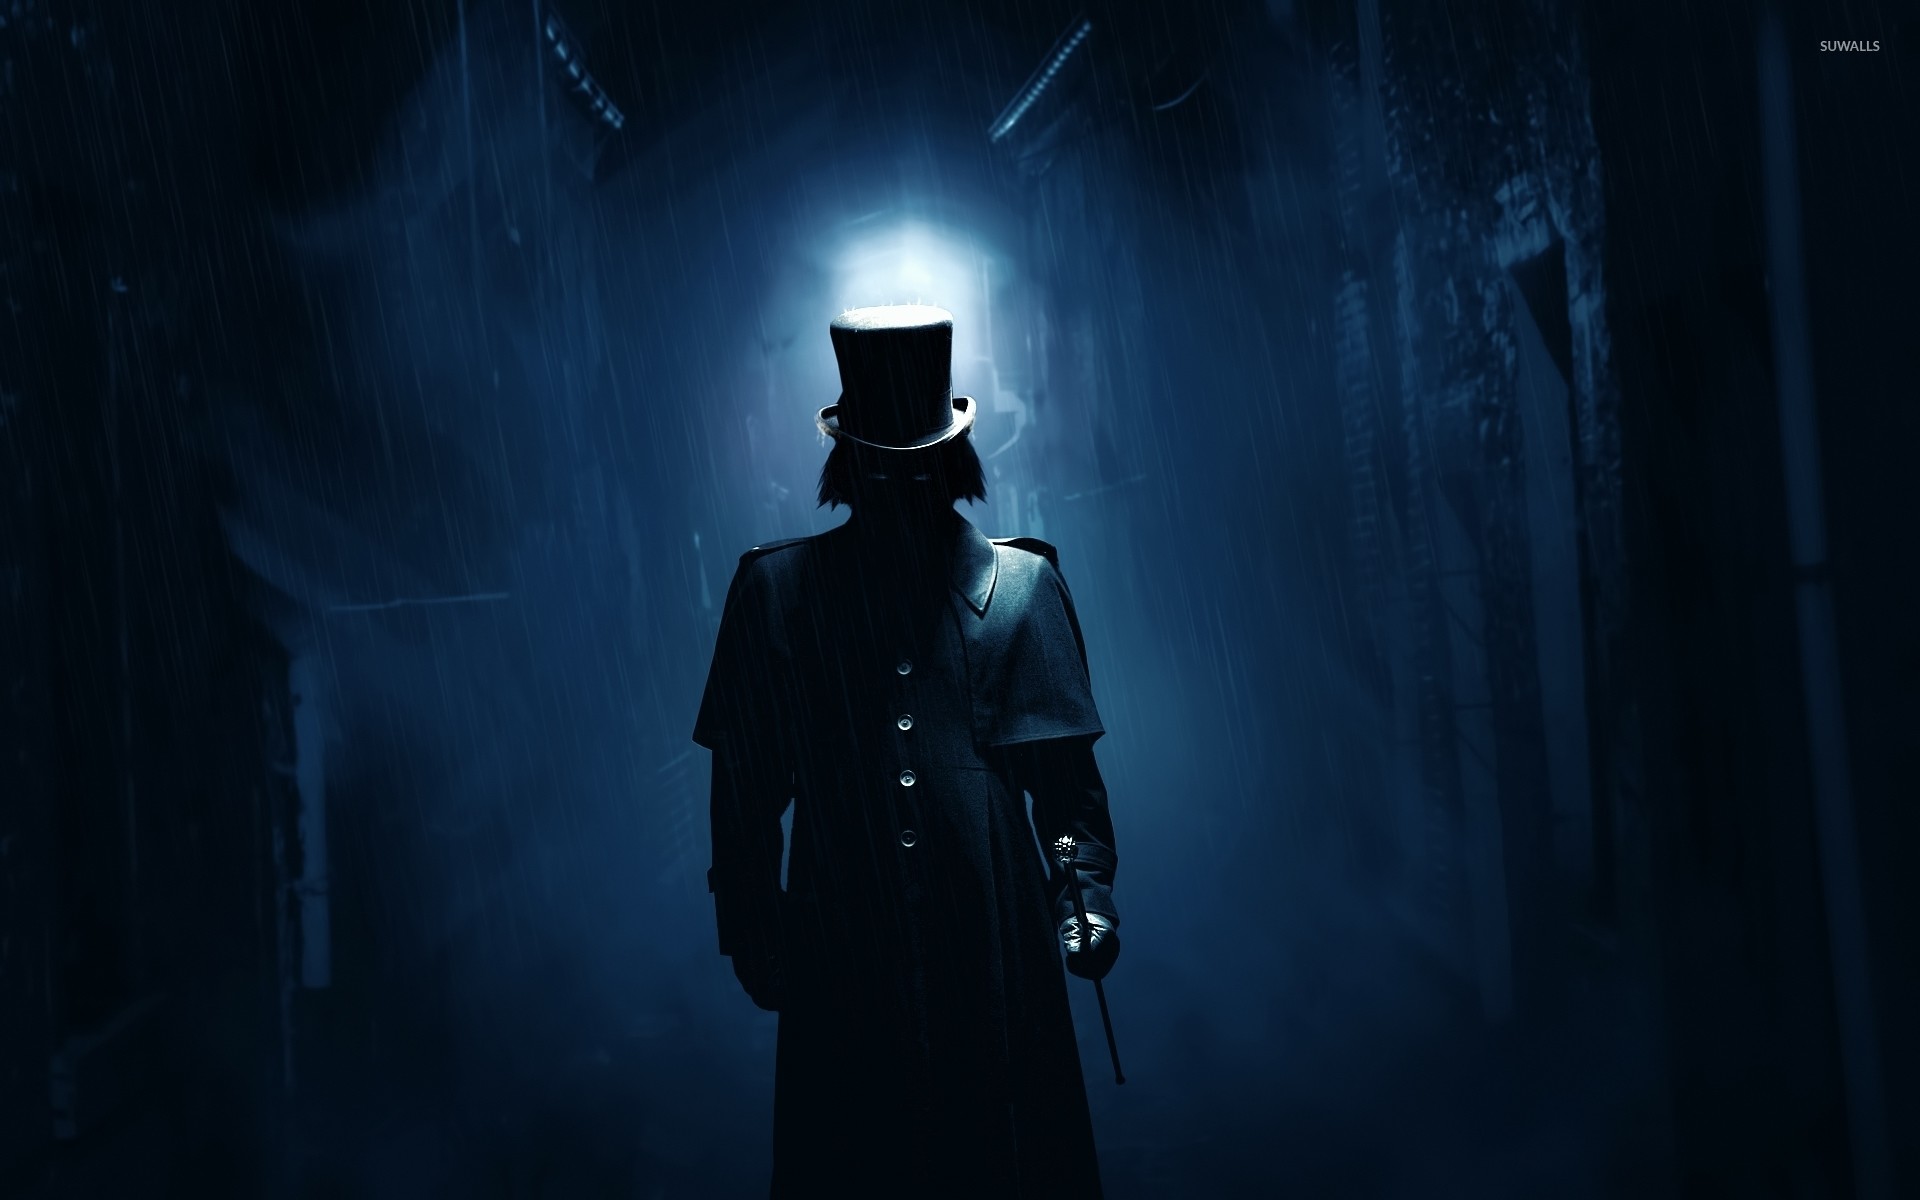 1920x1200 Jack The Ripper Wallpapers For Free Download, 34 Jack The Ripper .